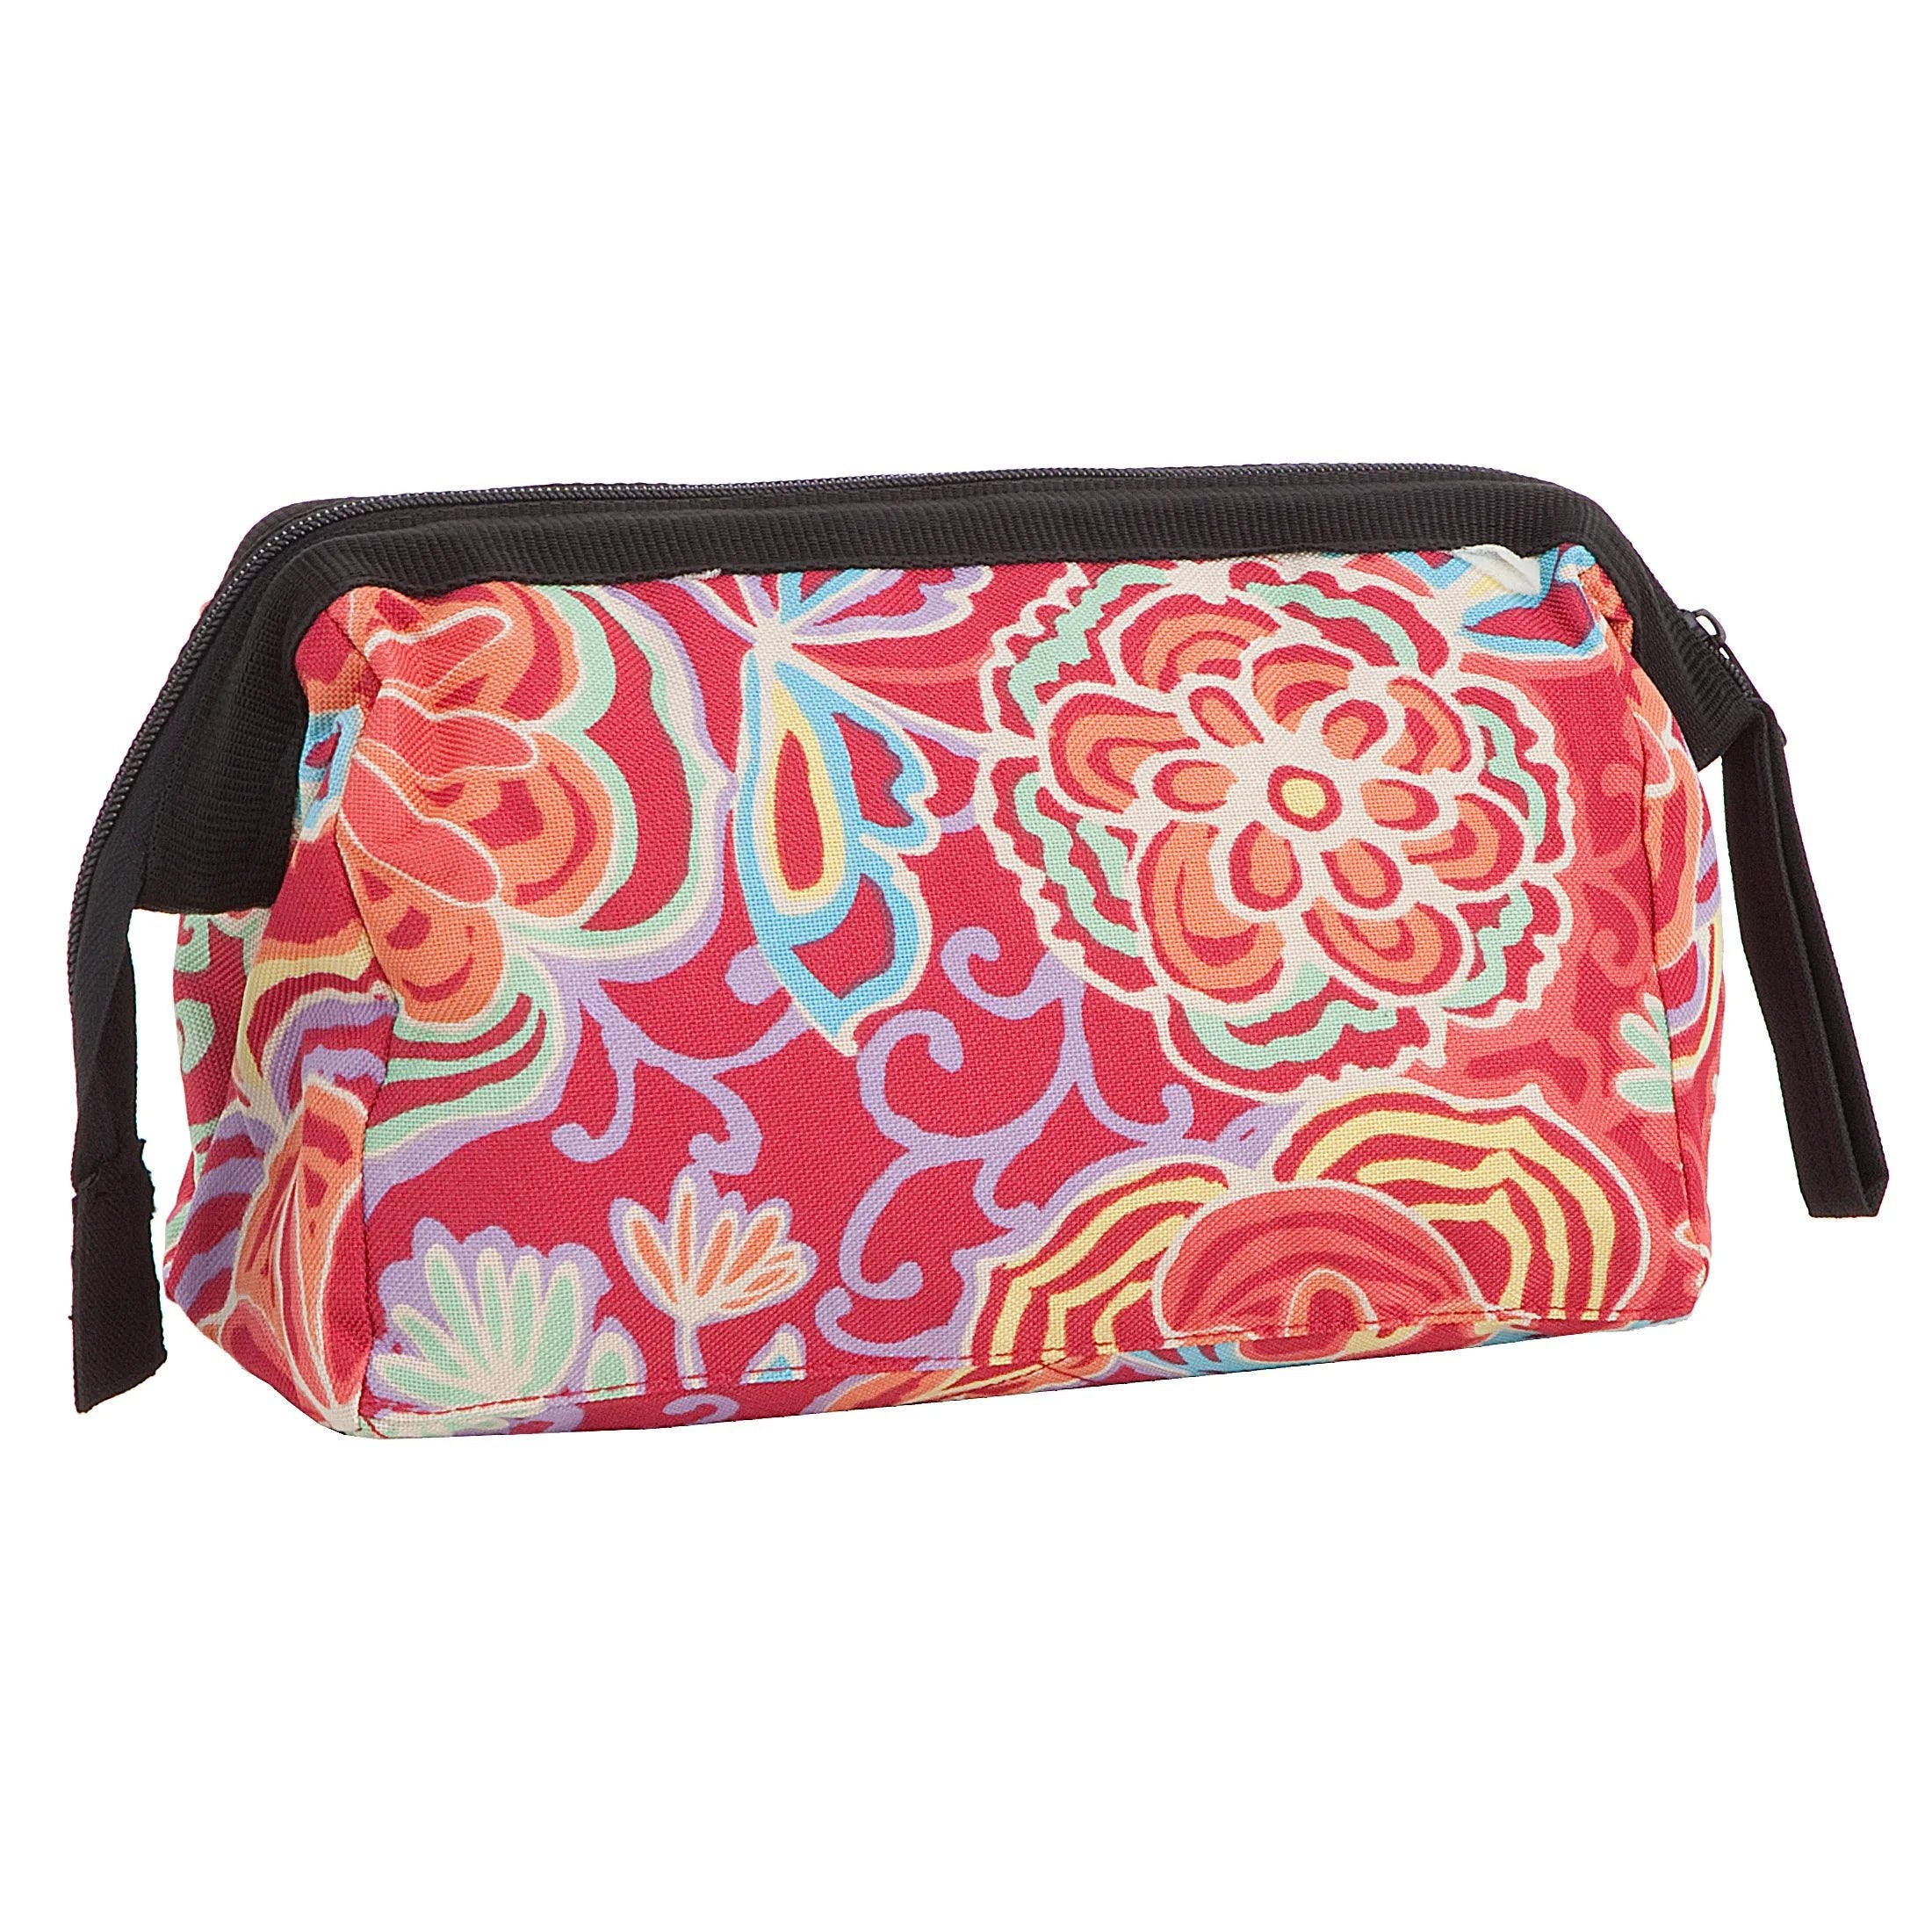 Reisenthel Travelling Travelcosmetic toiletry bag 26 cm - signature navy